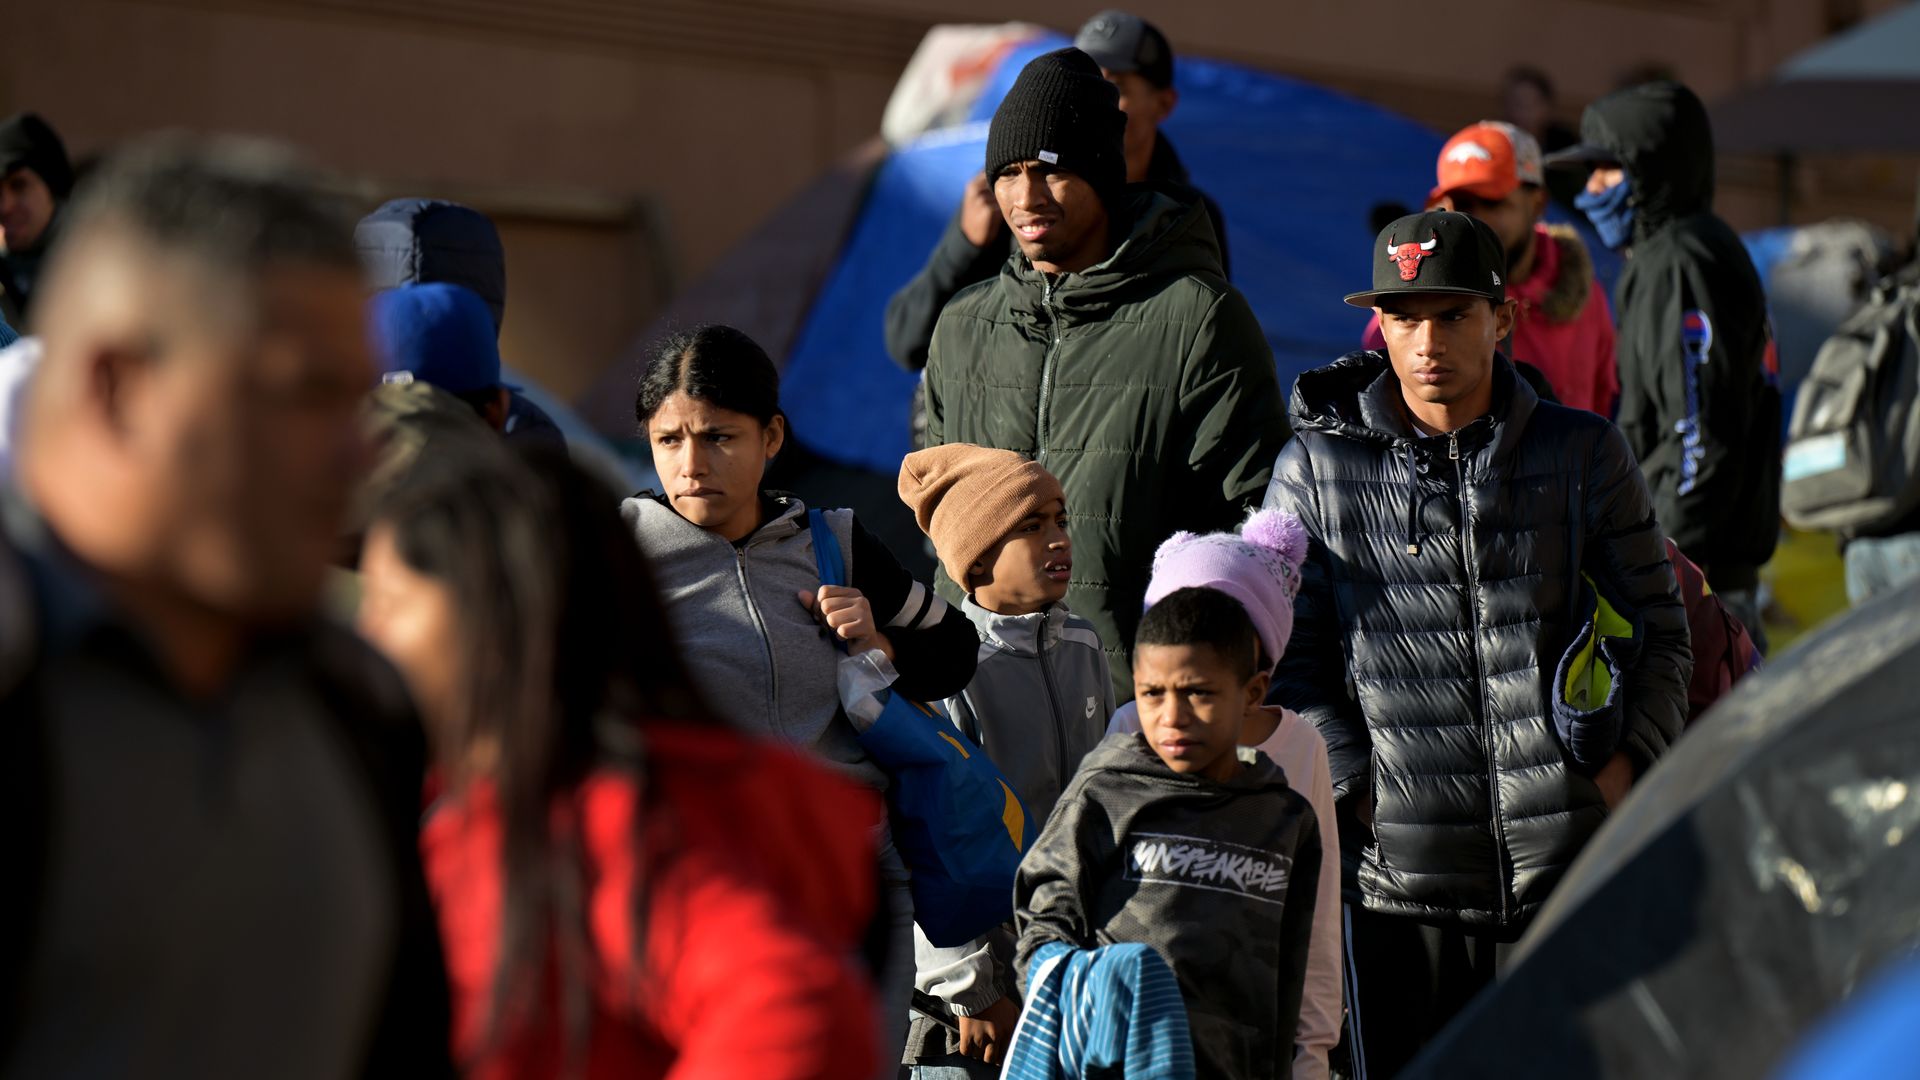 A photo of a line of migrants of differing ages, including children and adults, standing outside in winter clothing.